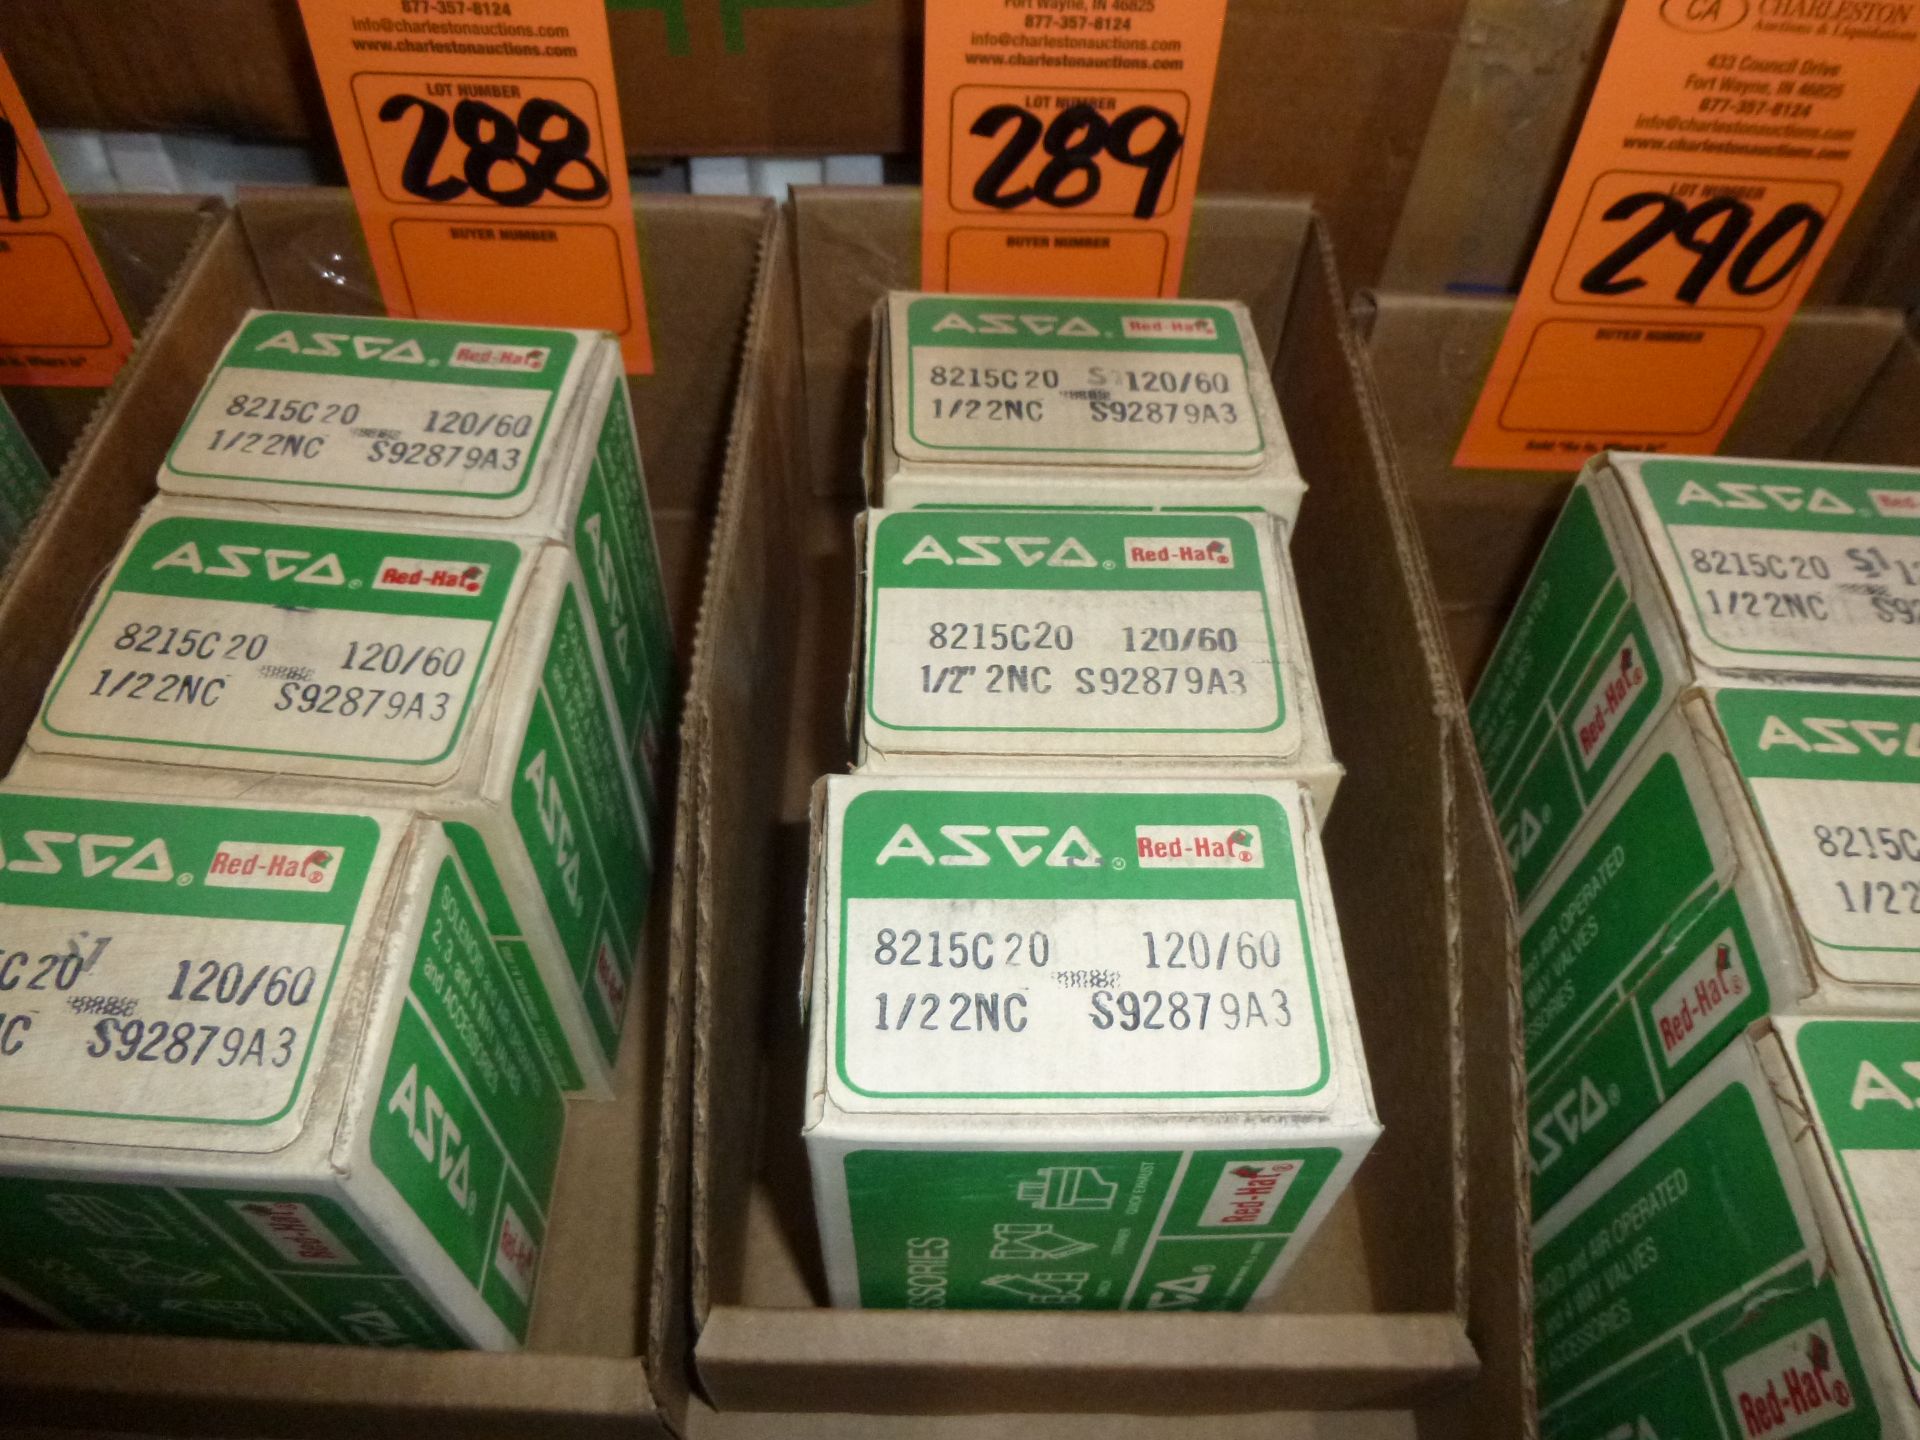 Qty 3 Asco valves model 8215C20, new in boxes, as always with Brolyn LLC auctions, all lots can be